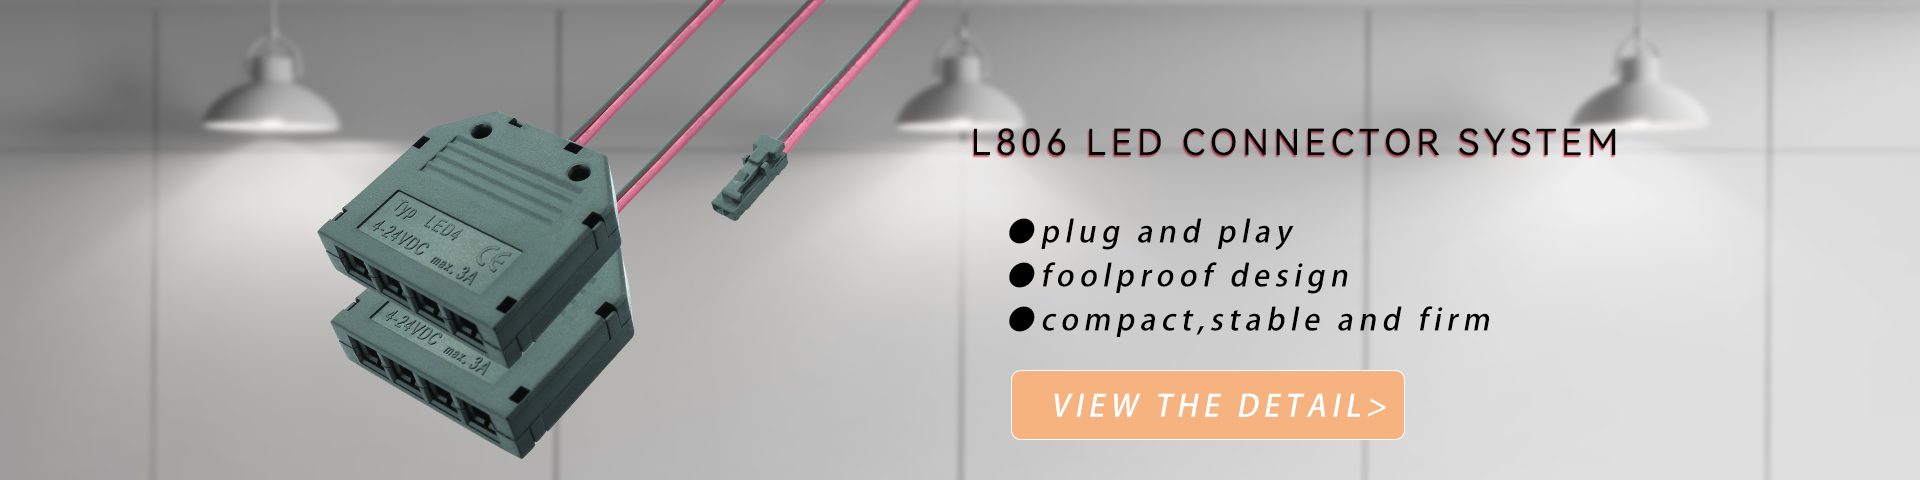 L806 LED CONNECTOR SYSTEM